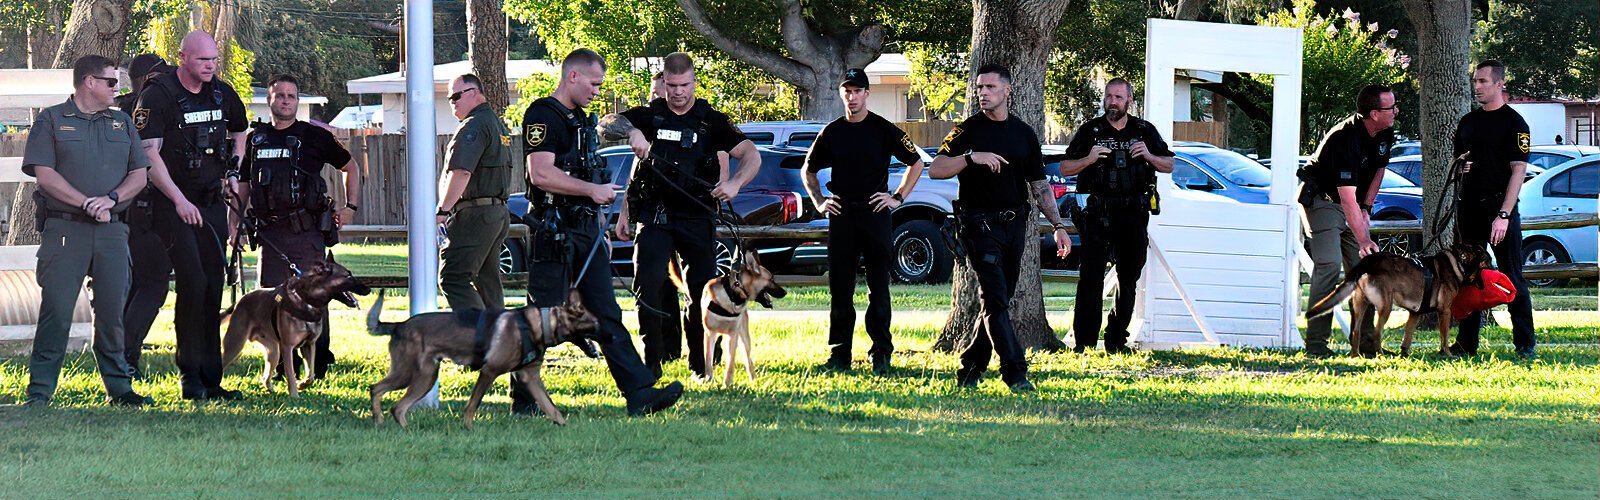 The Pinellas County Sheriff’s Office  K-9 squad gathers at England Brothers Park in Pinellas Park for the graduation ceremony of three K-9s.